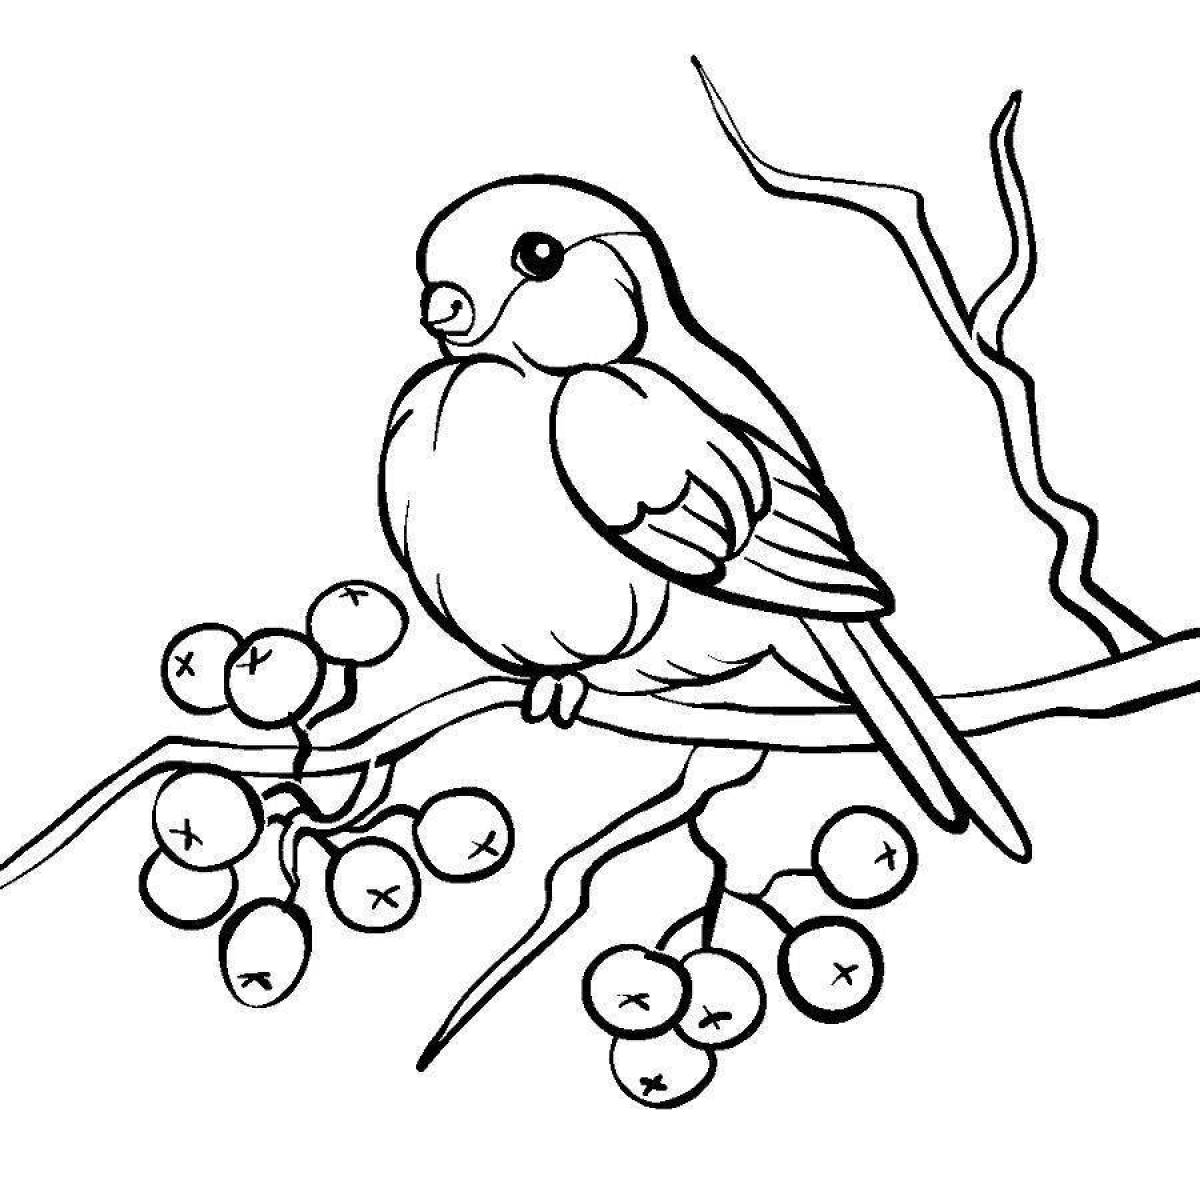 Coloring book cheerful bullfinch for children